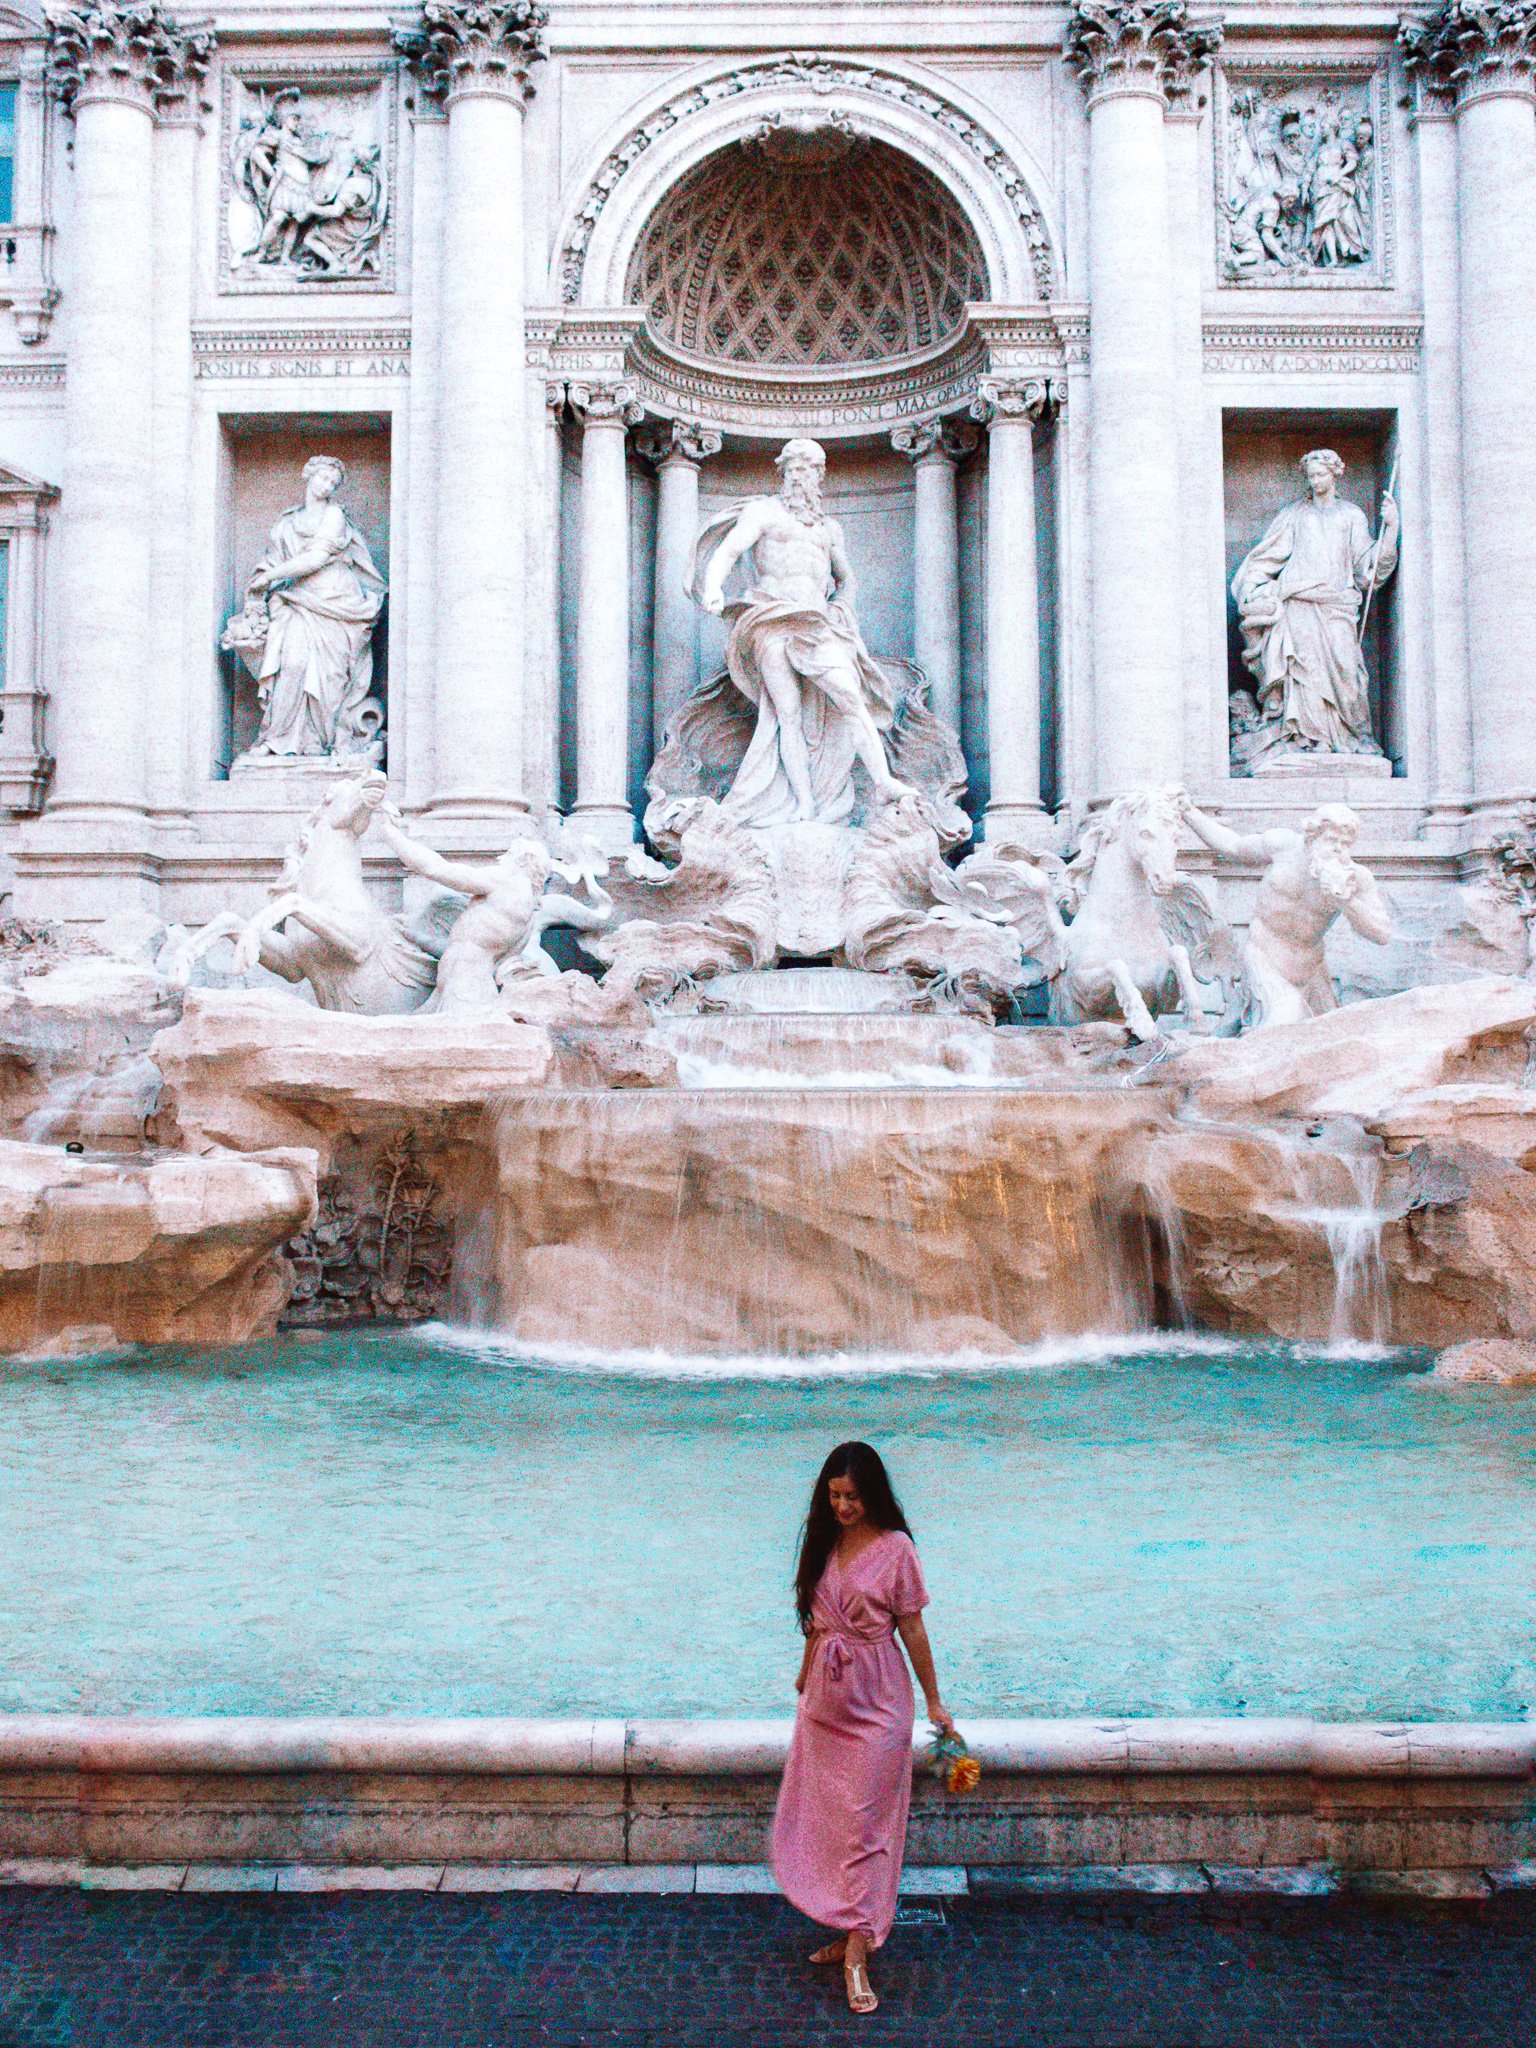 Fontana Di Trevi At Sunrise Without People